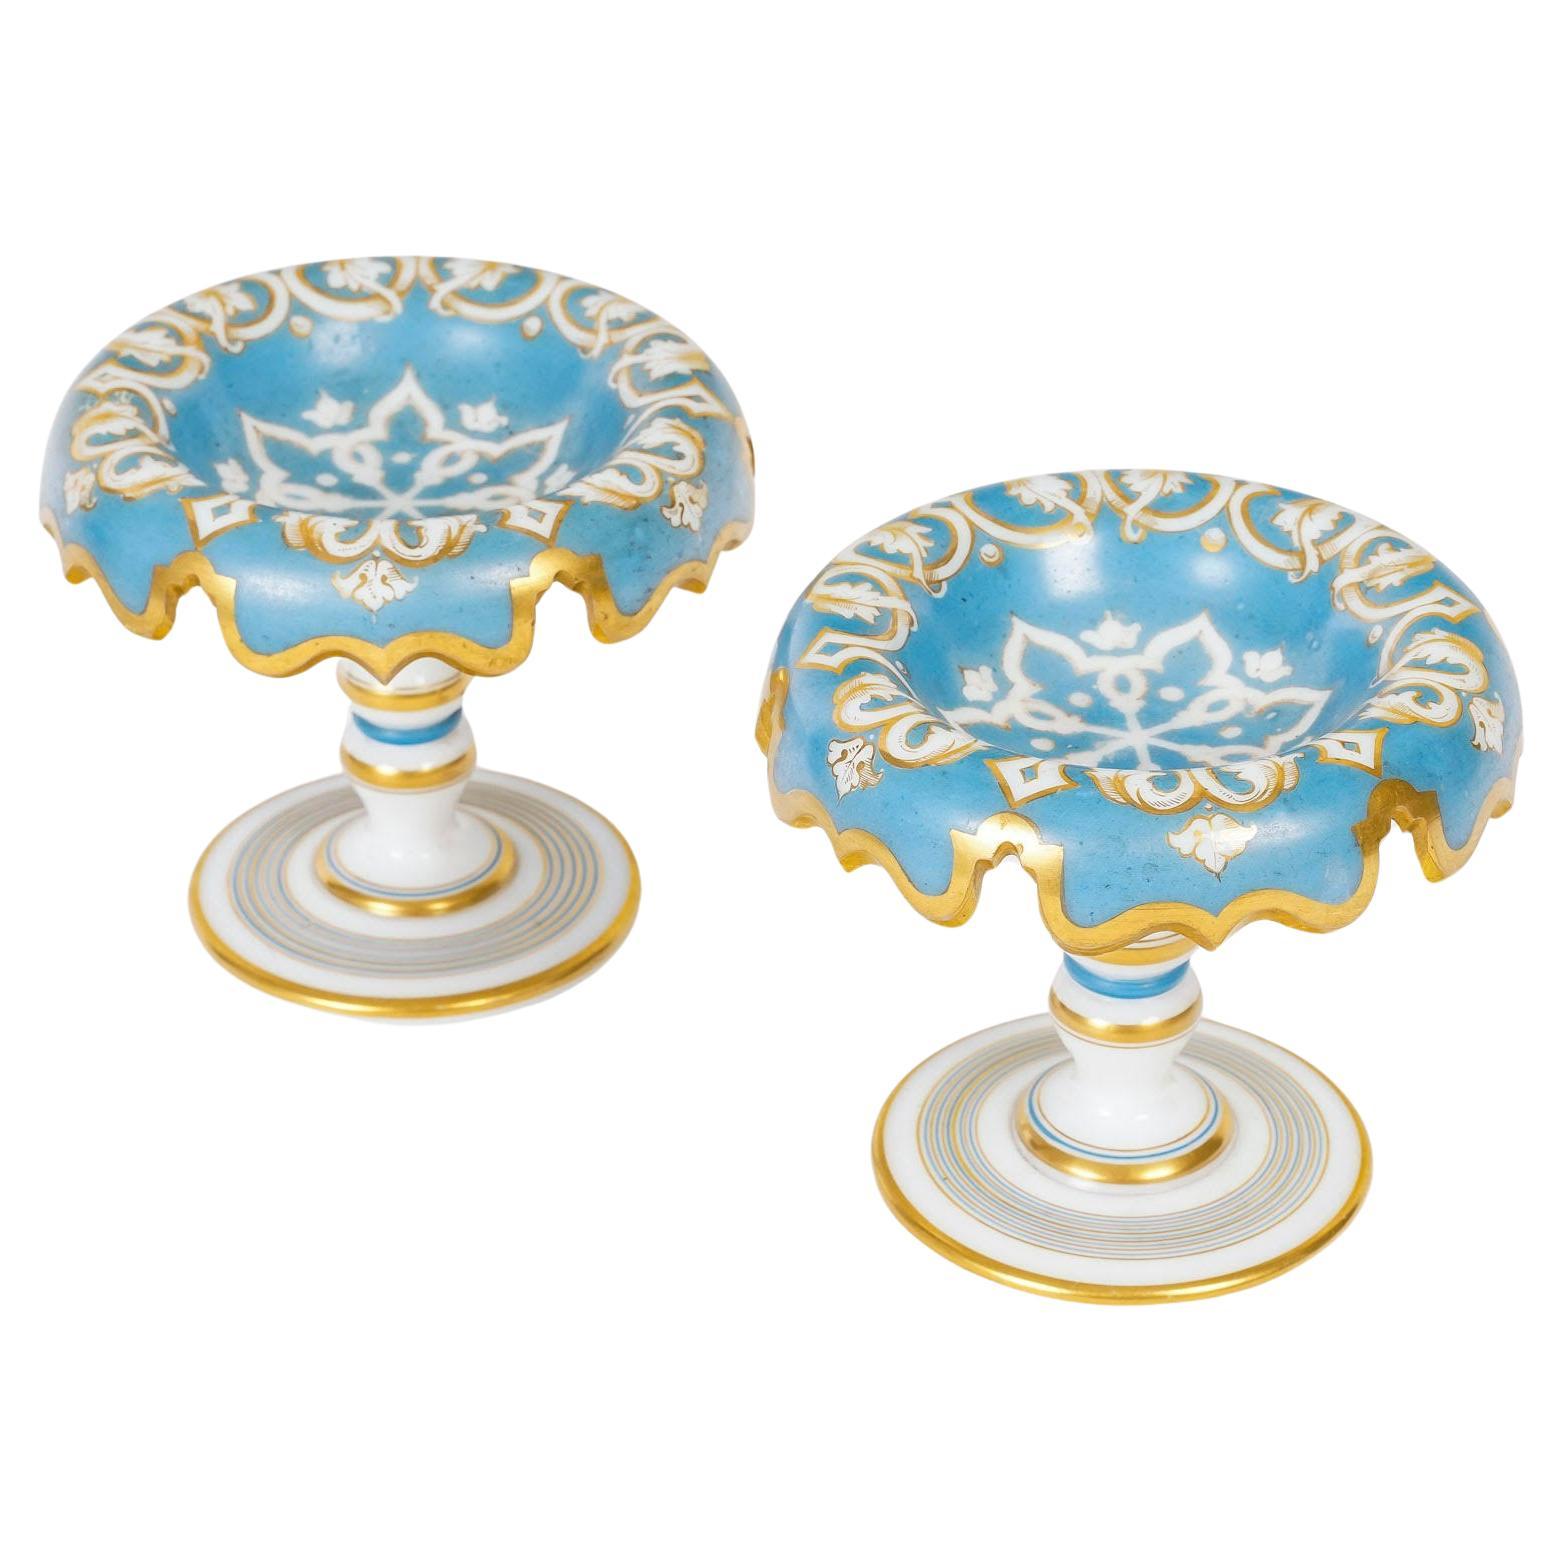 Pair of Blue and Gold Opaline Cups, 19th Century, Napoleon III Period. For Sale